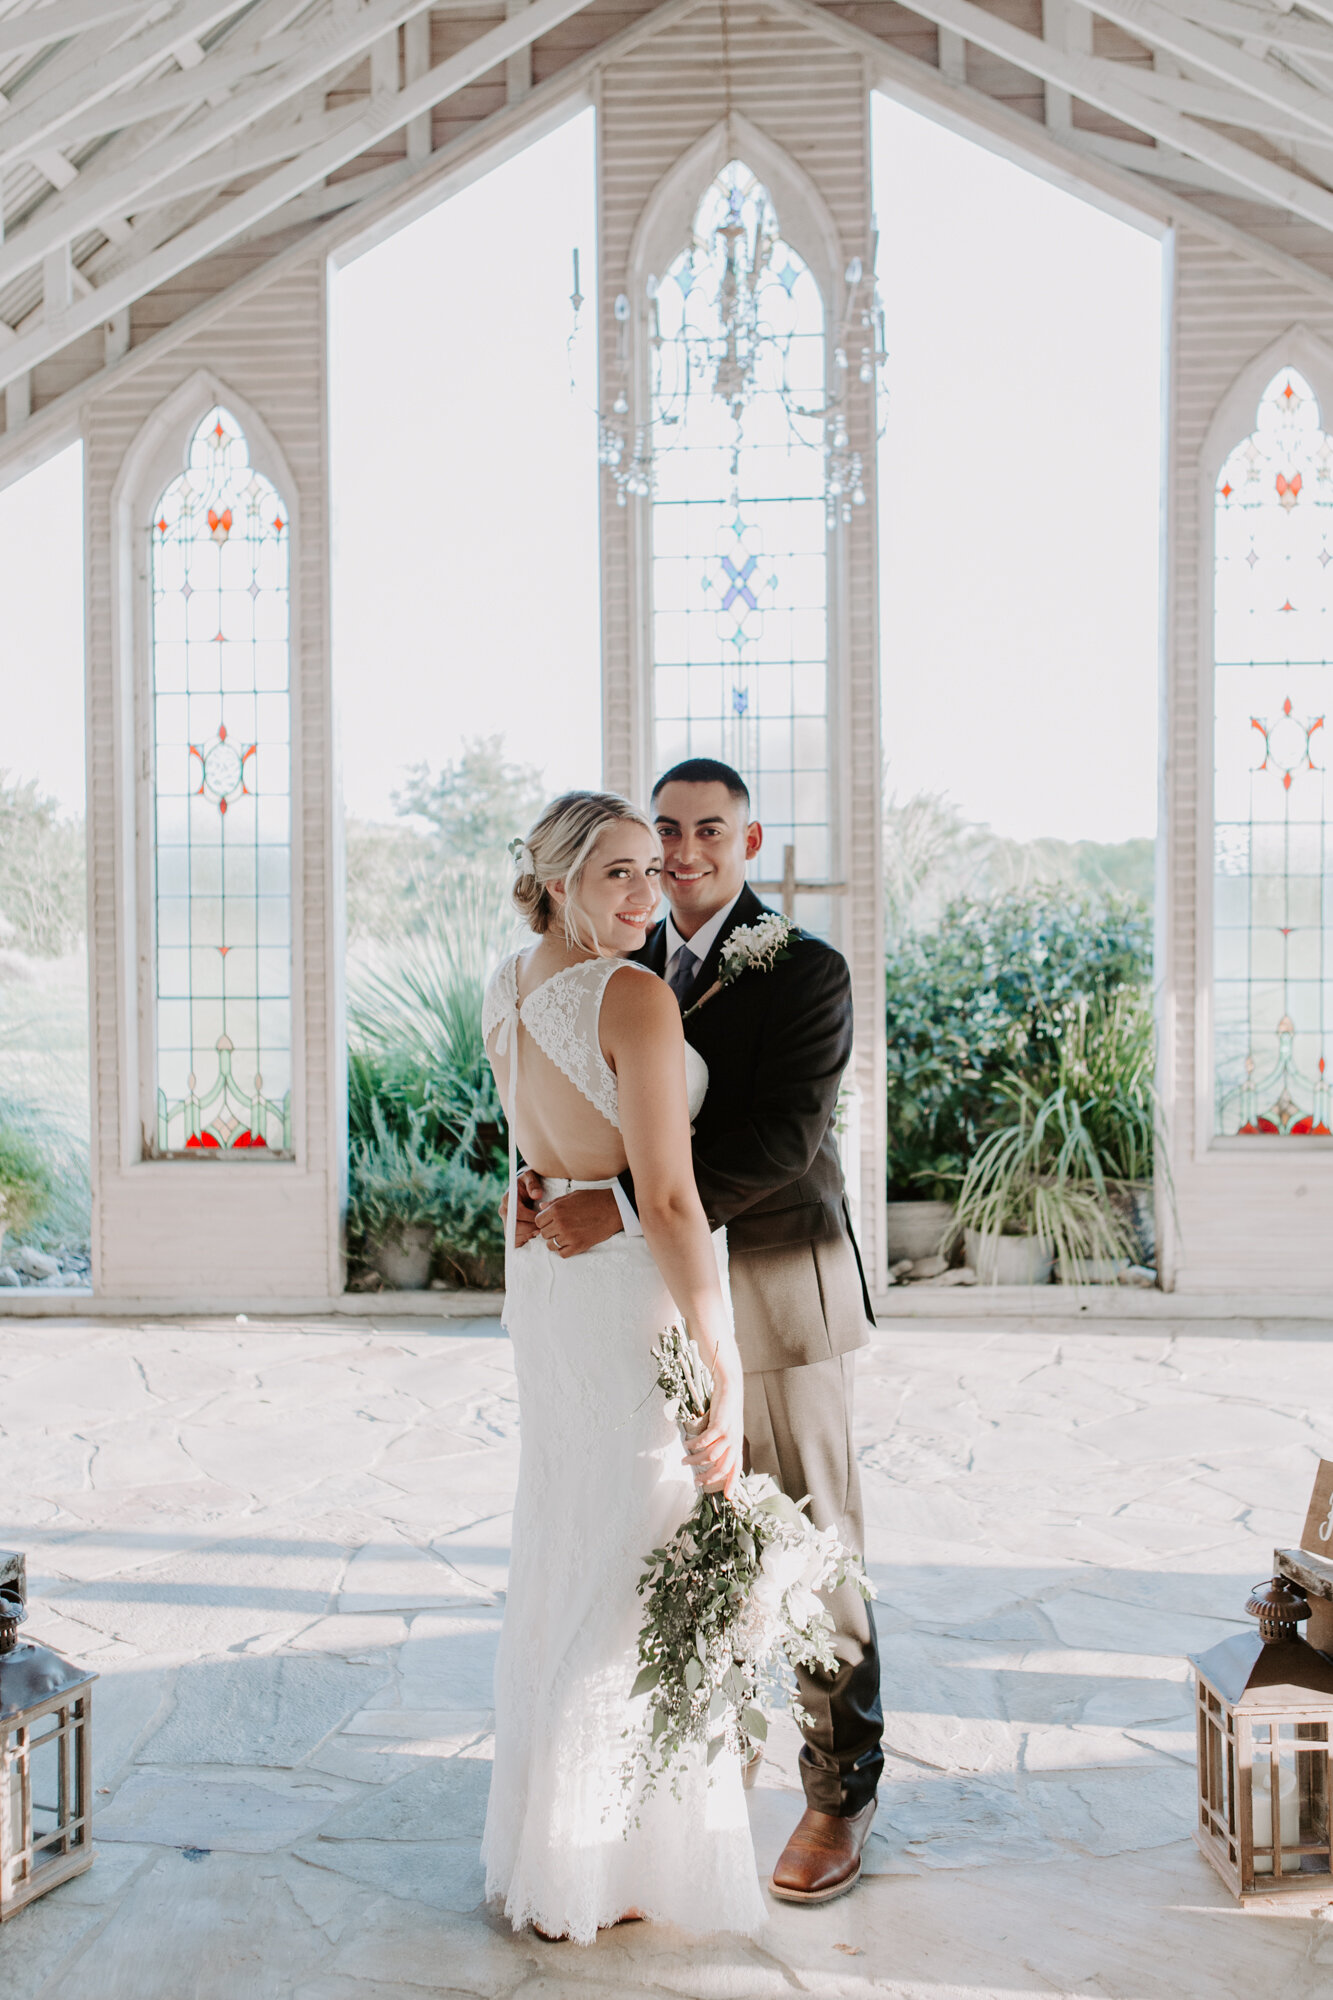 Bride and groom hug in the chapel. Radiant Bohemian Hill Country Wedding at Gruene Estate in New Braunfels, TX